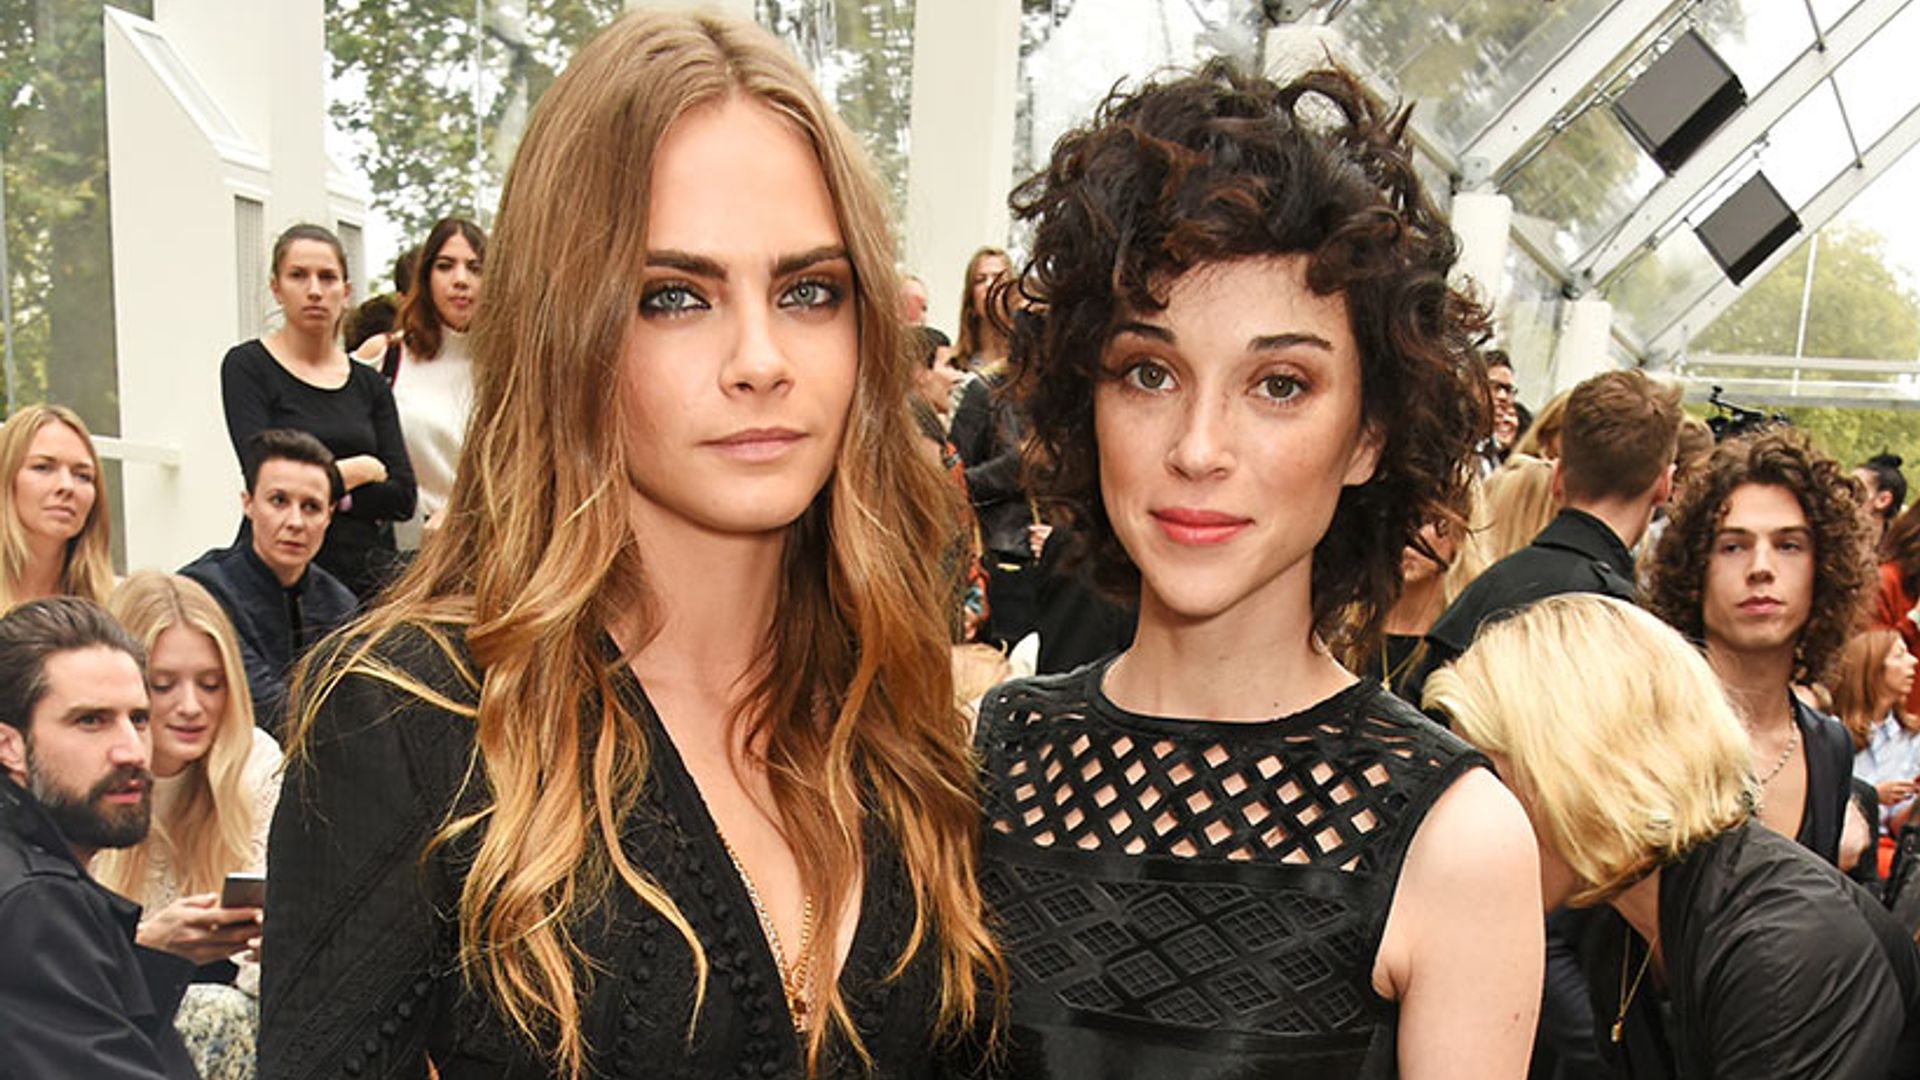 Cara Delevingne and St. Vincent split due to 'pressures of the long-distance romance'